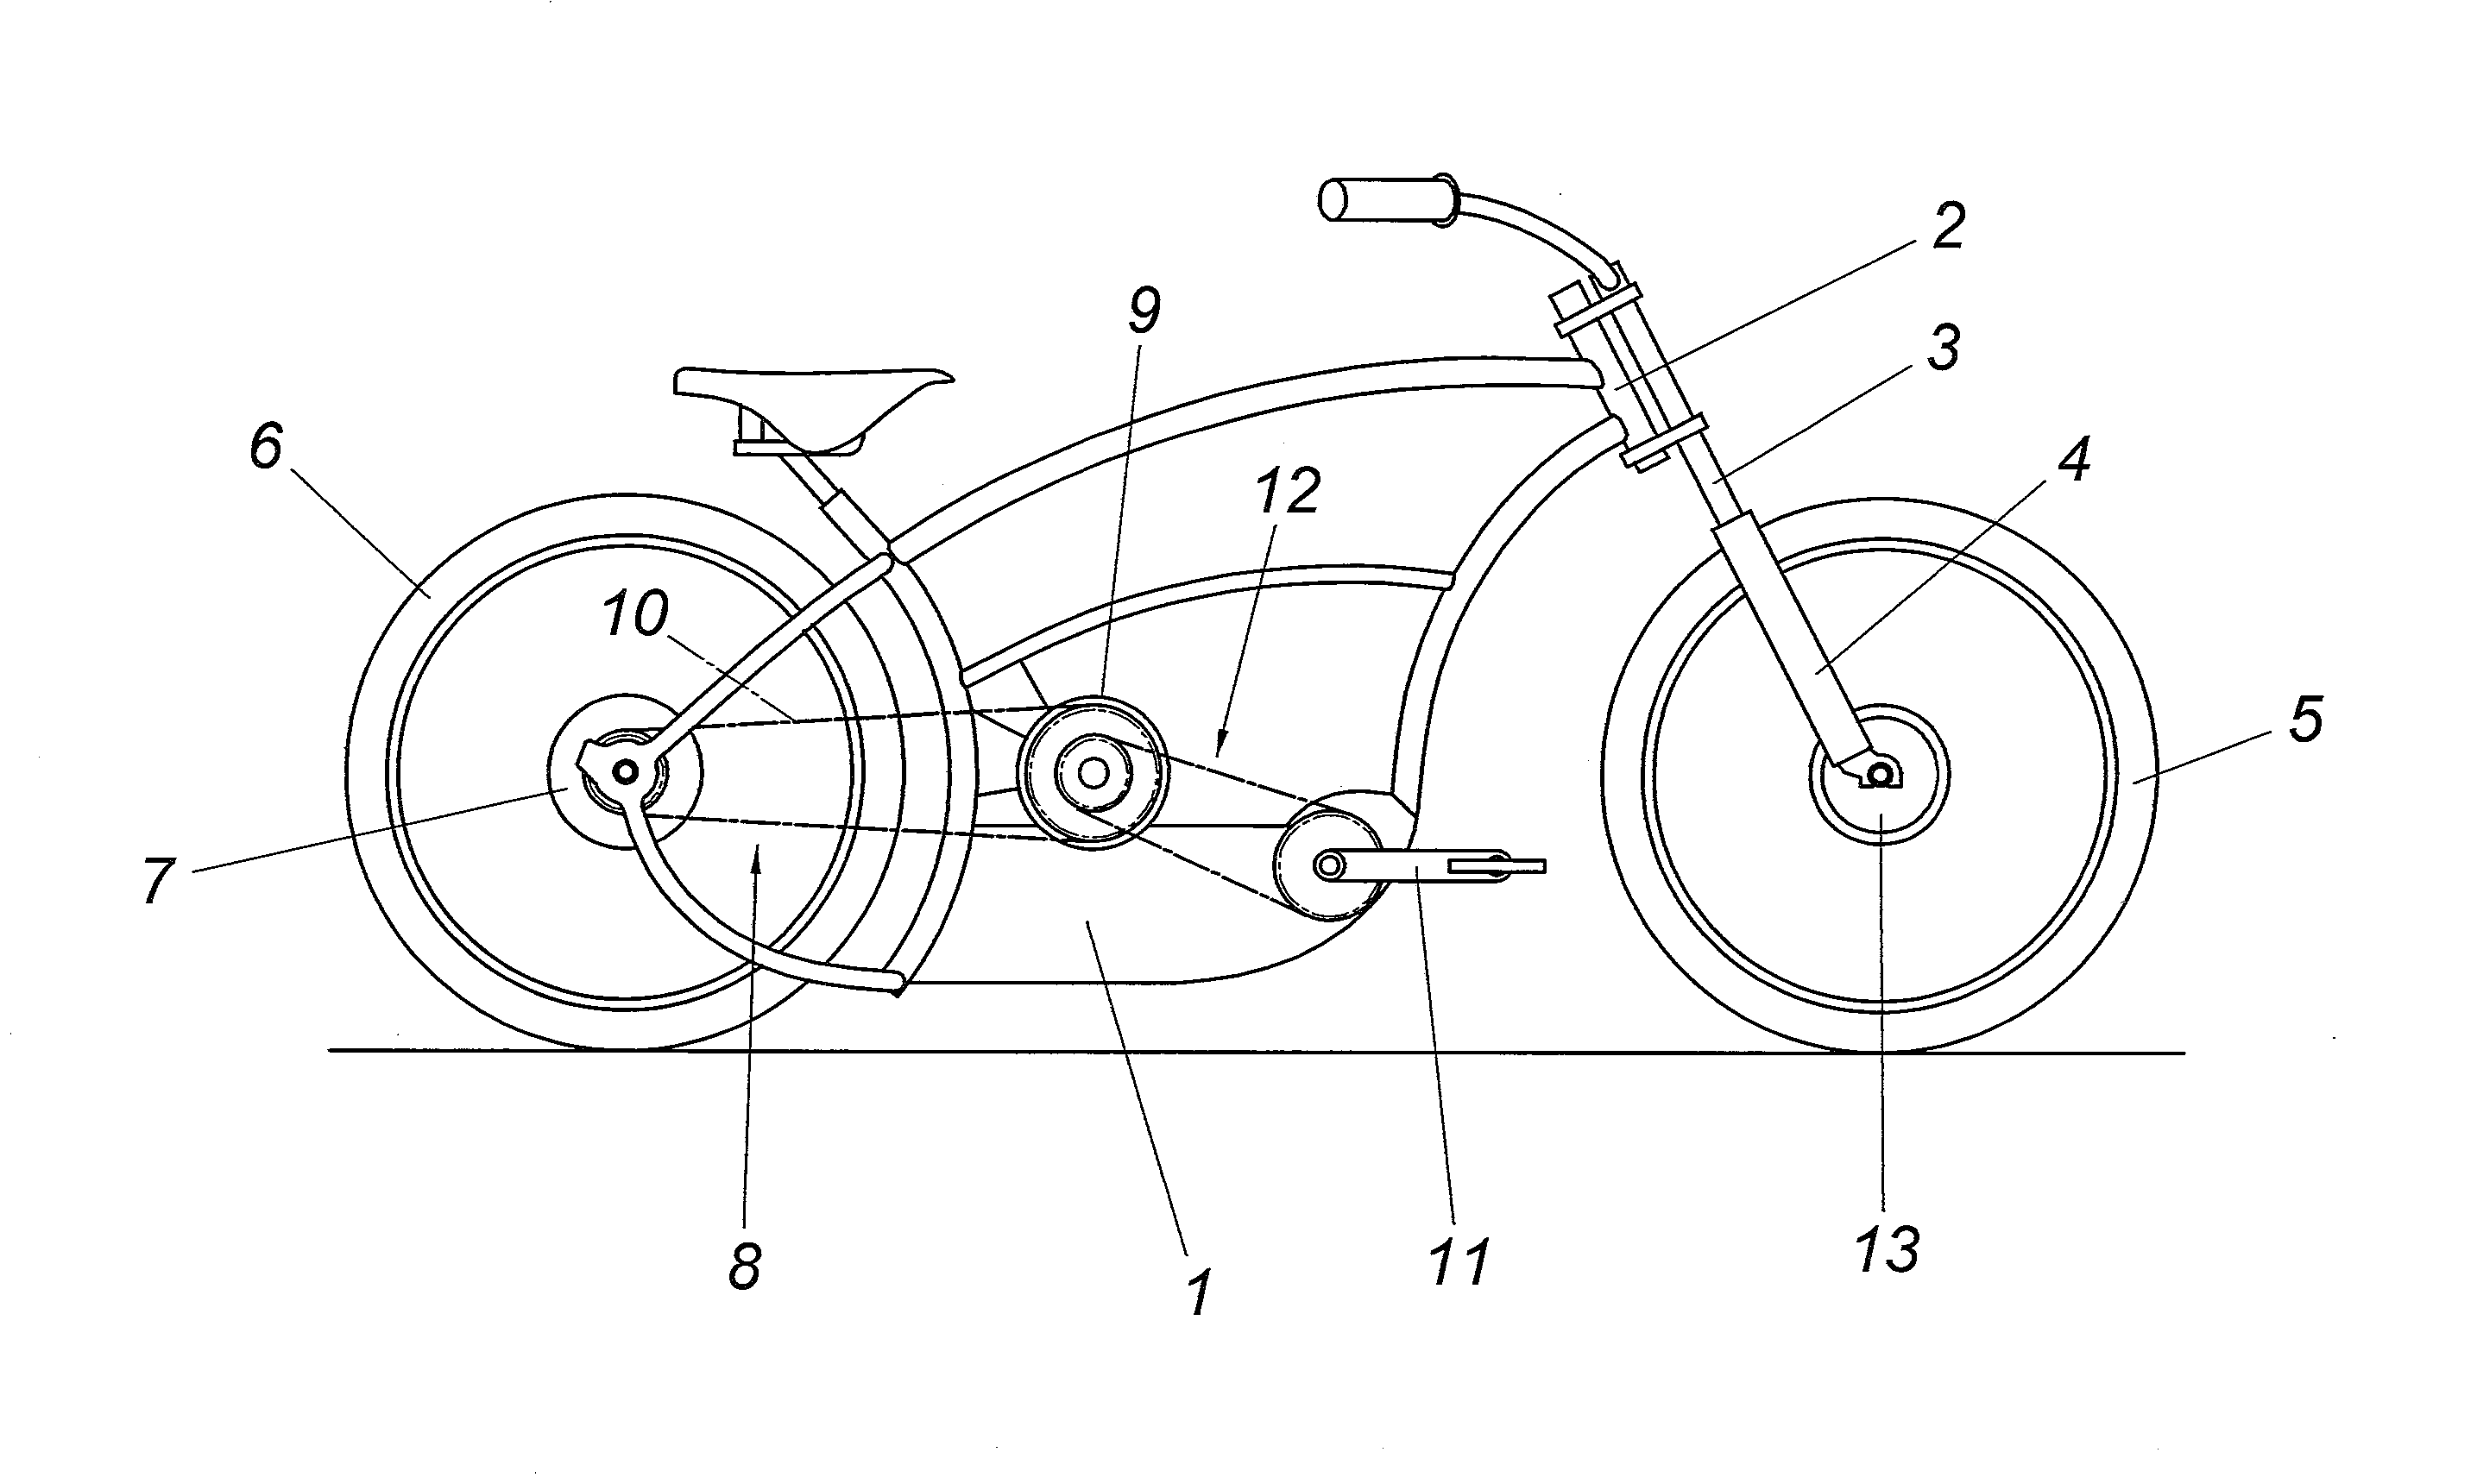 Bicycle having an electrical auiliary drive